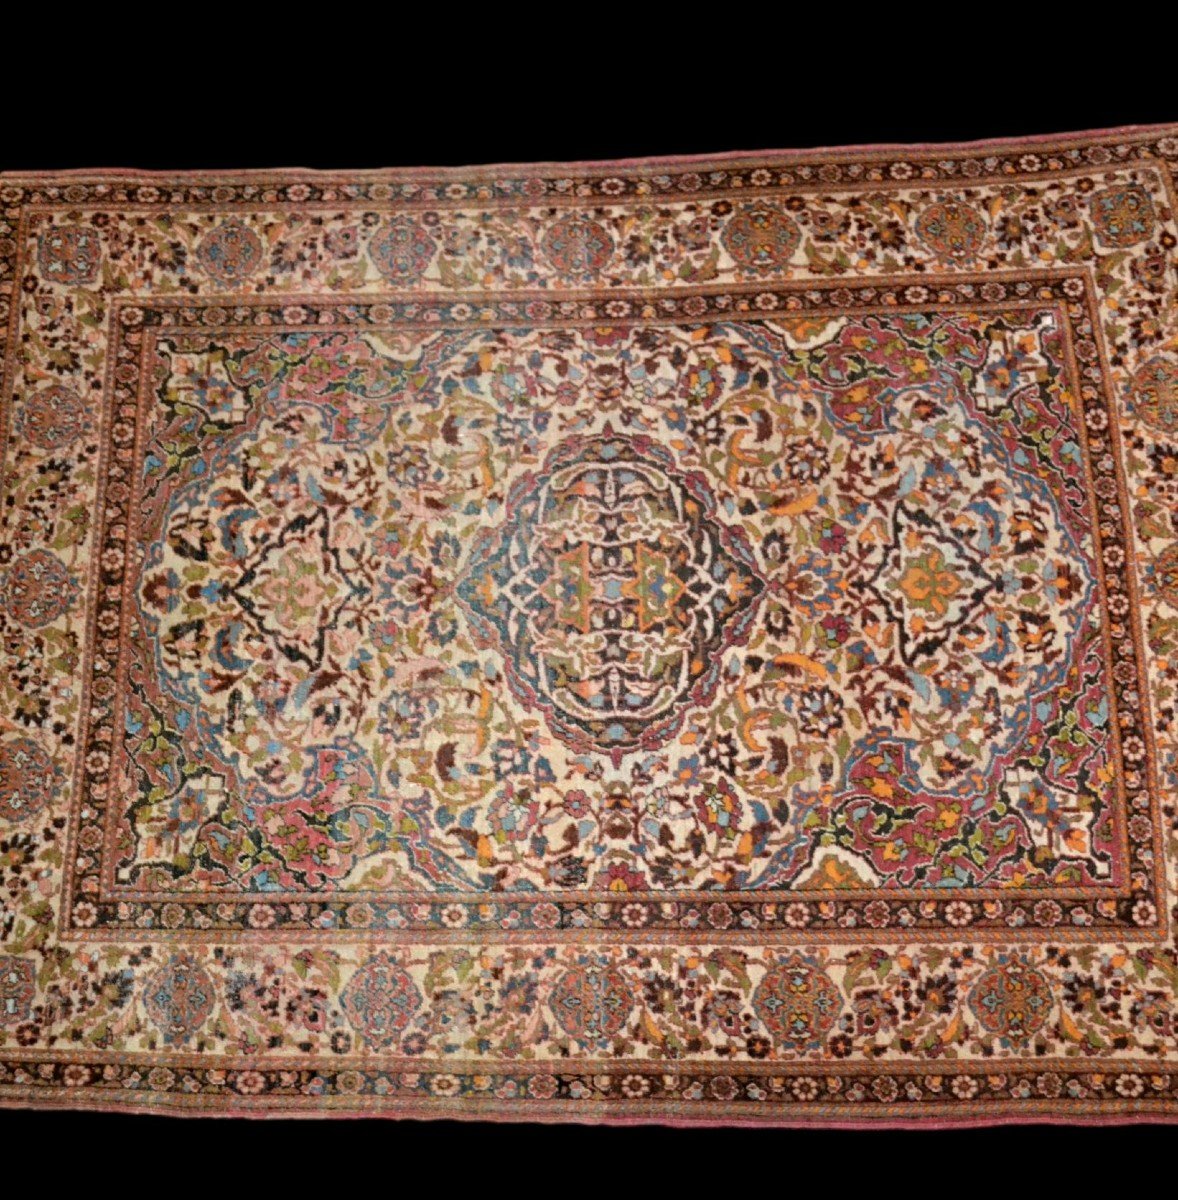 Ancient Isfahan, 157 Cm X 207 Cm, Hand-knotted Wool In Persia, Iran, Under The Kadjar Dynasty-photo-2